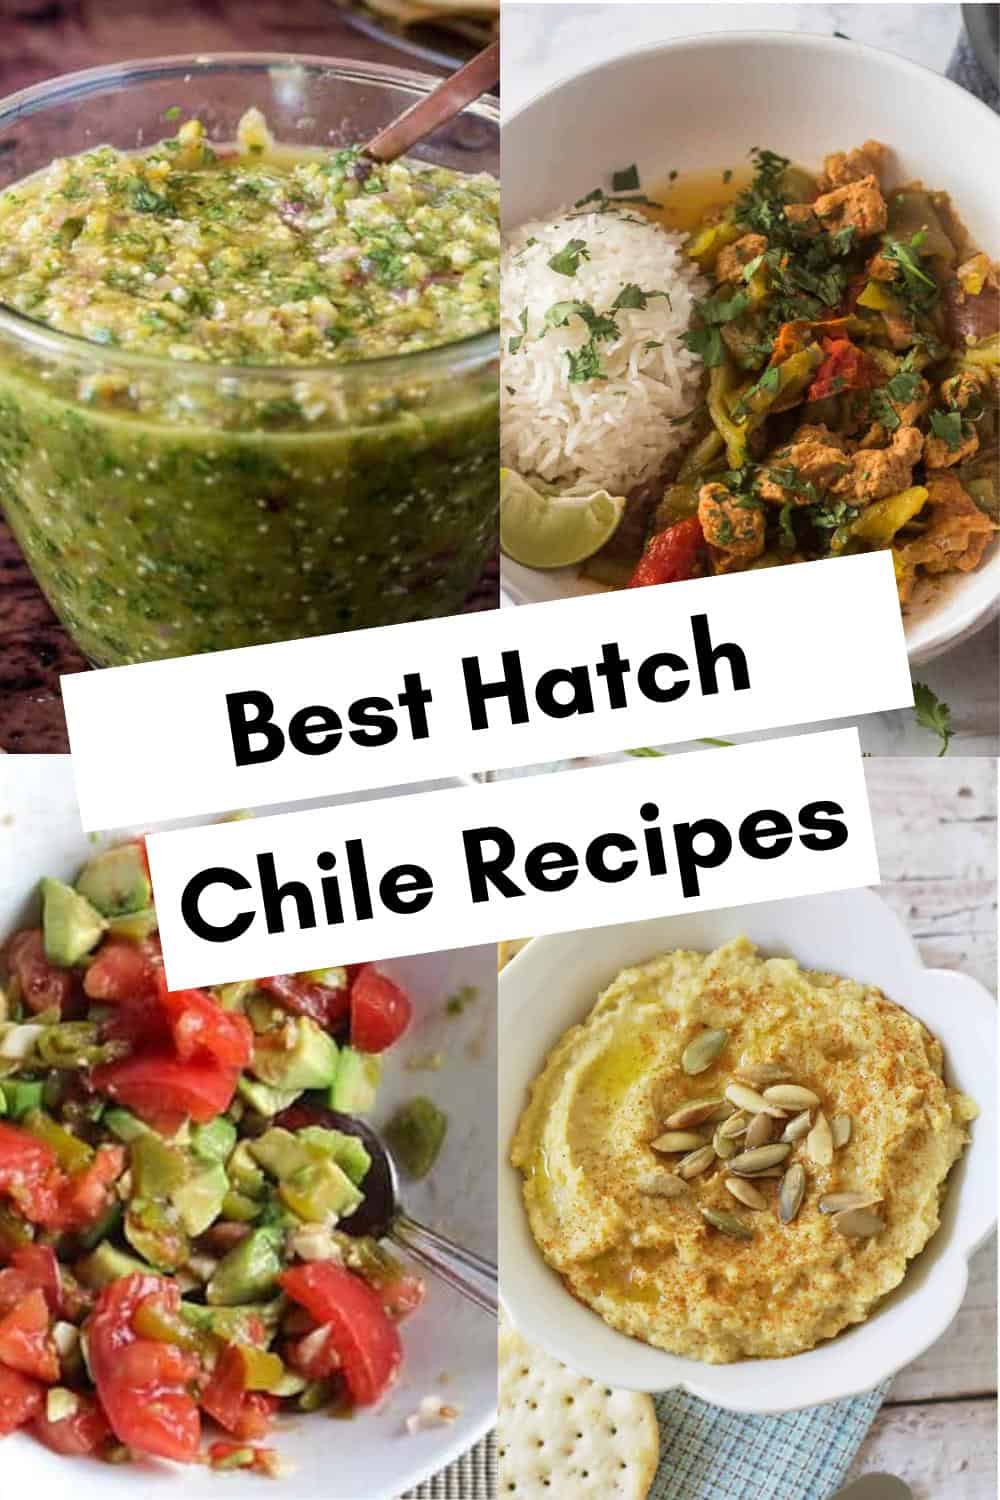 Collage with four images of Hatch chile recipes, with text that says, "Best Hatch Chile Recipes".